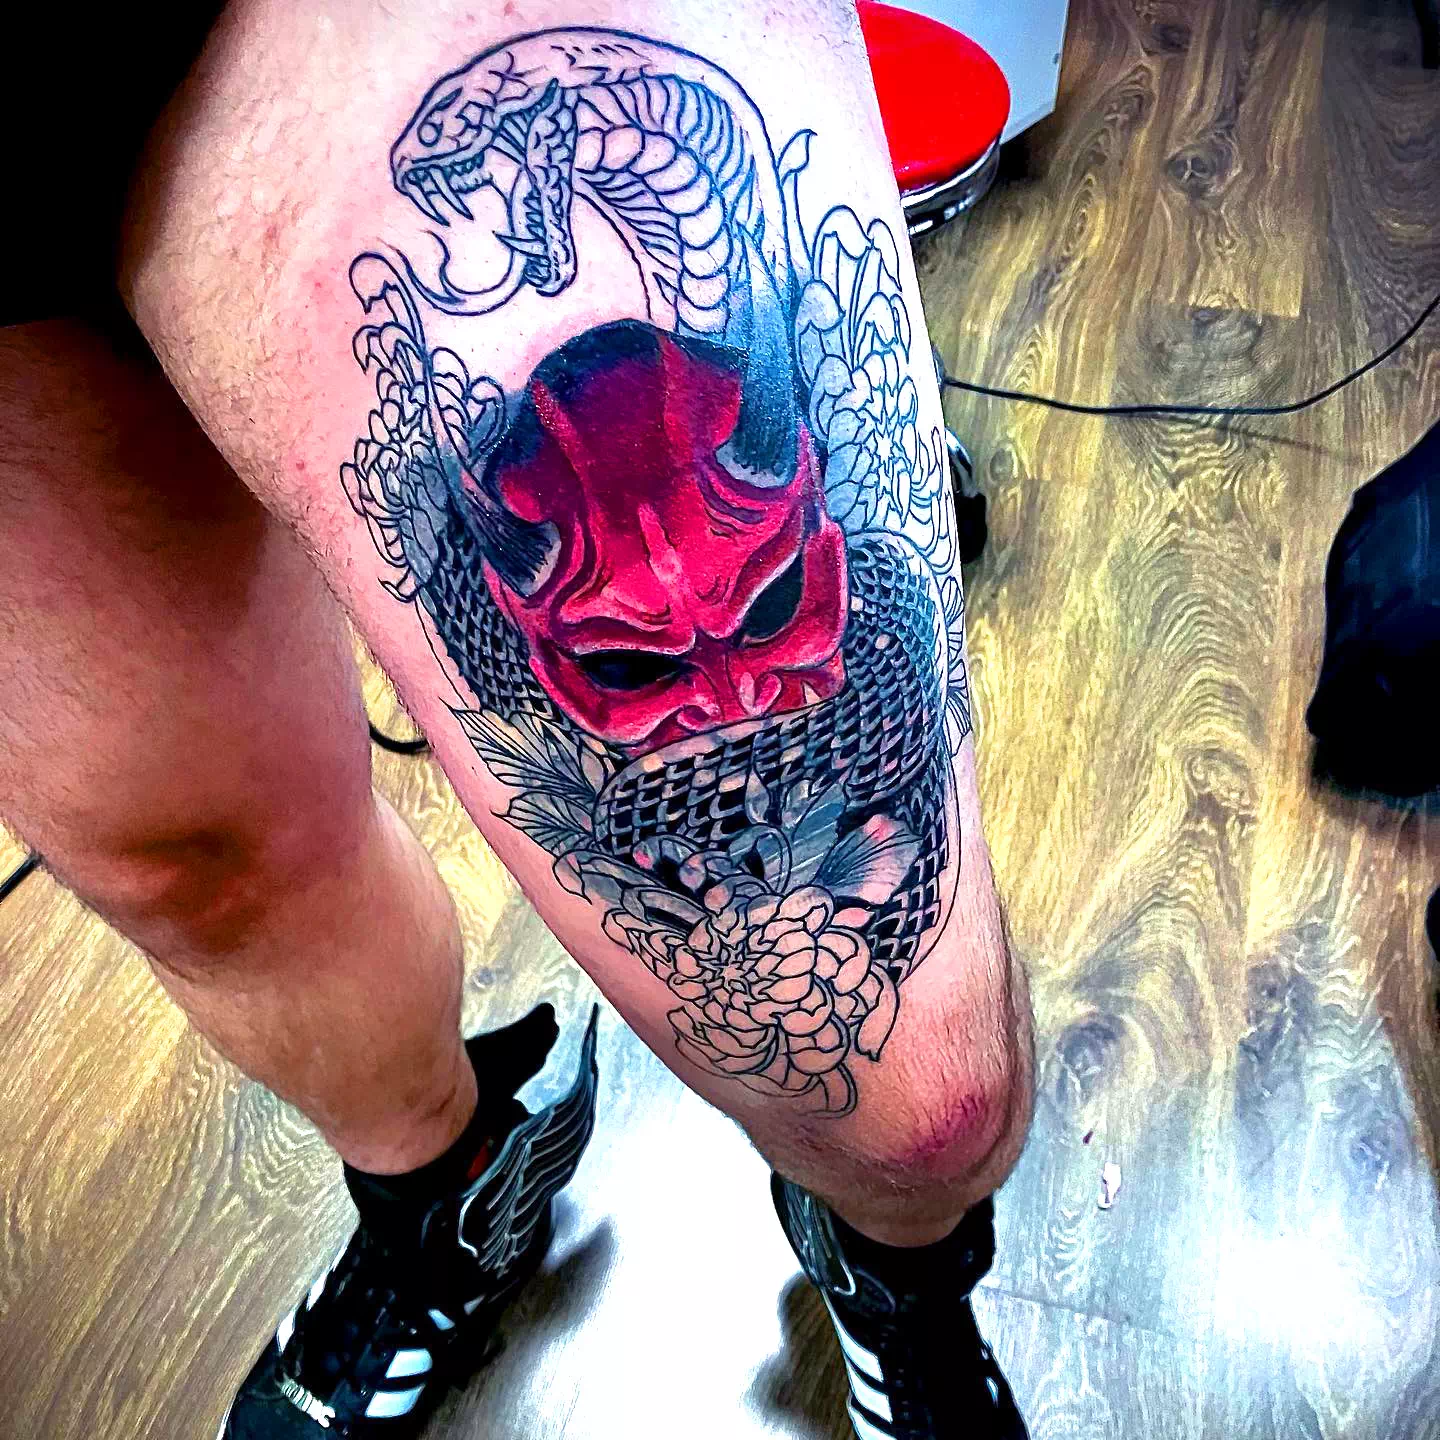 Thigh Oni Mask Tattoo For Men